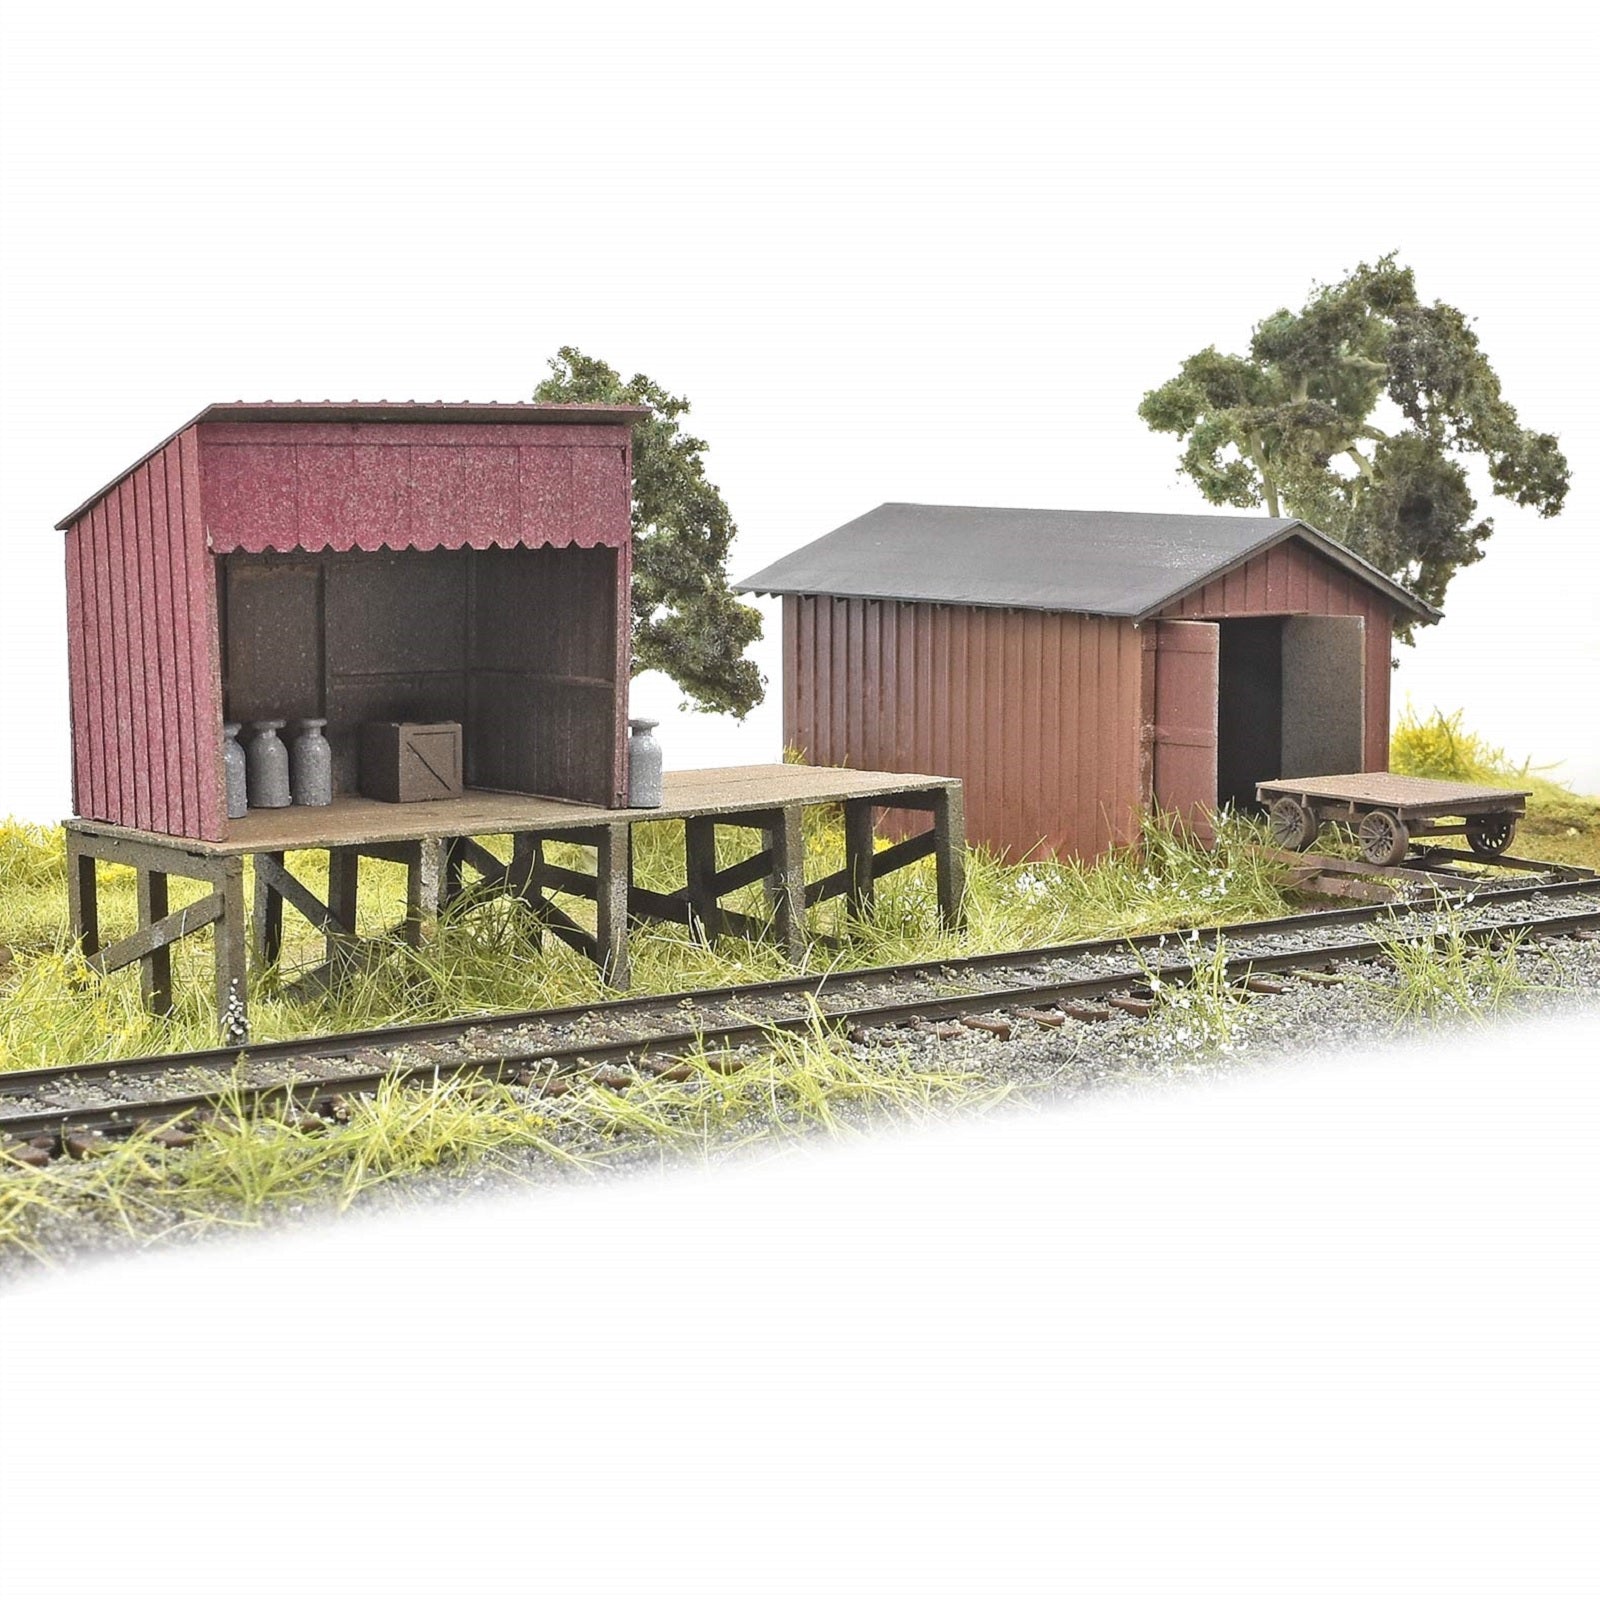 Tichy Train Group 'Wayside Structures' Kit, HO Scale